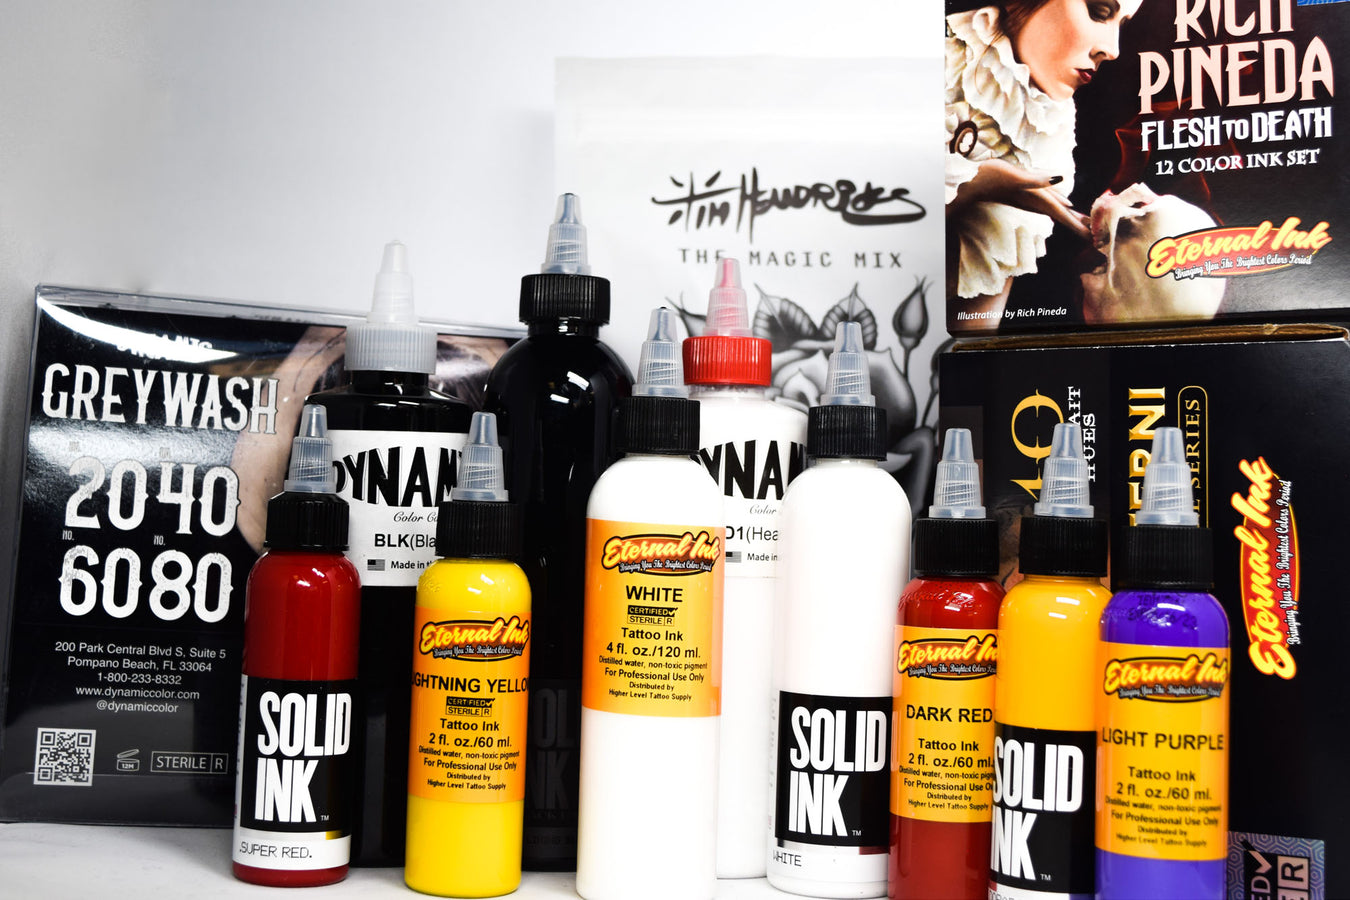 Higher Level Tattoo Supply - High Quality Supplies for Tattoo Artists | Vegan and Cruelty Free Tattoo Ink Made in the USA